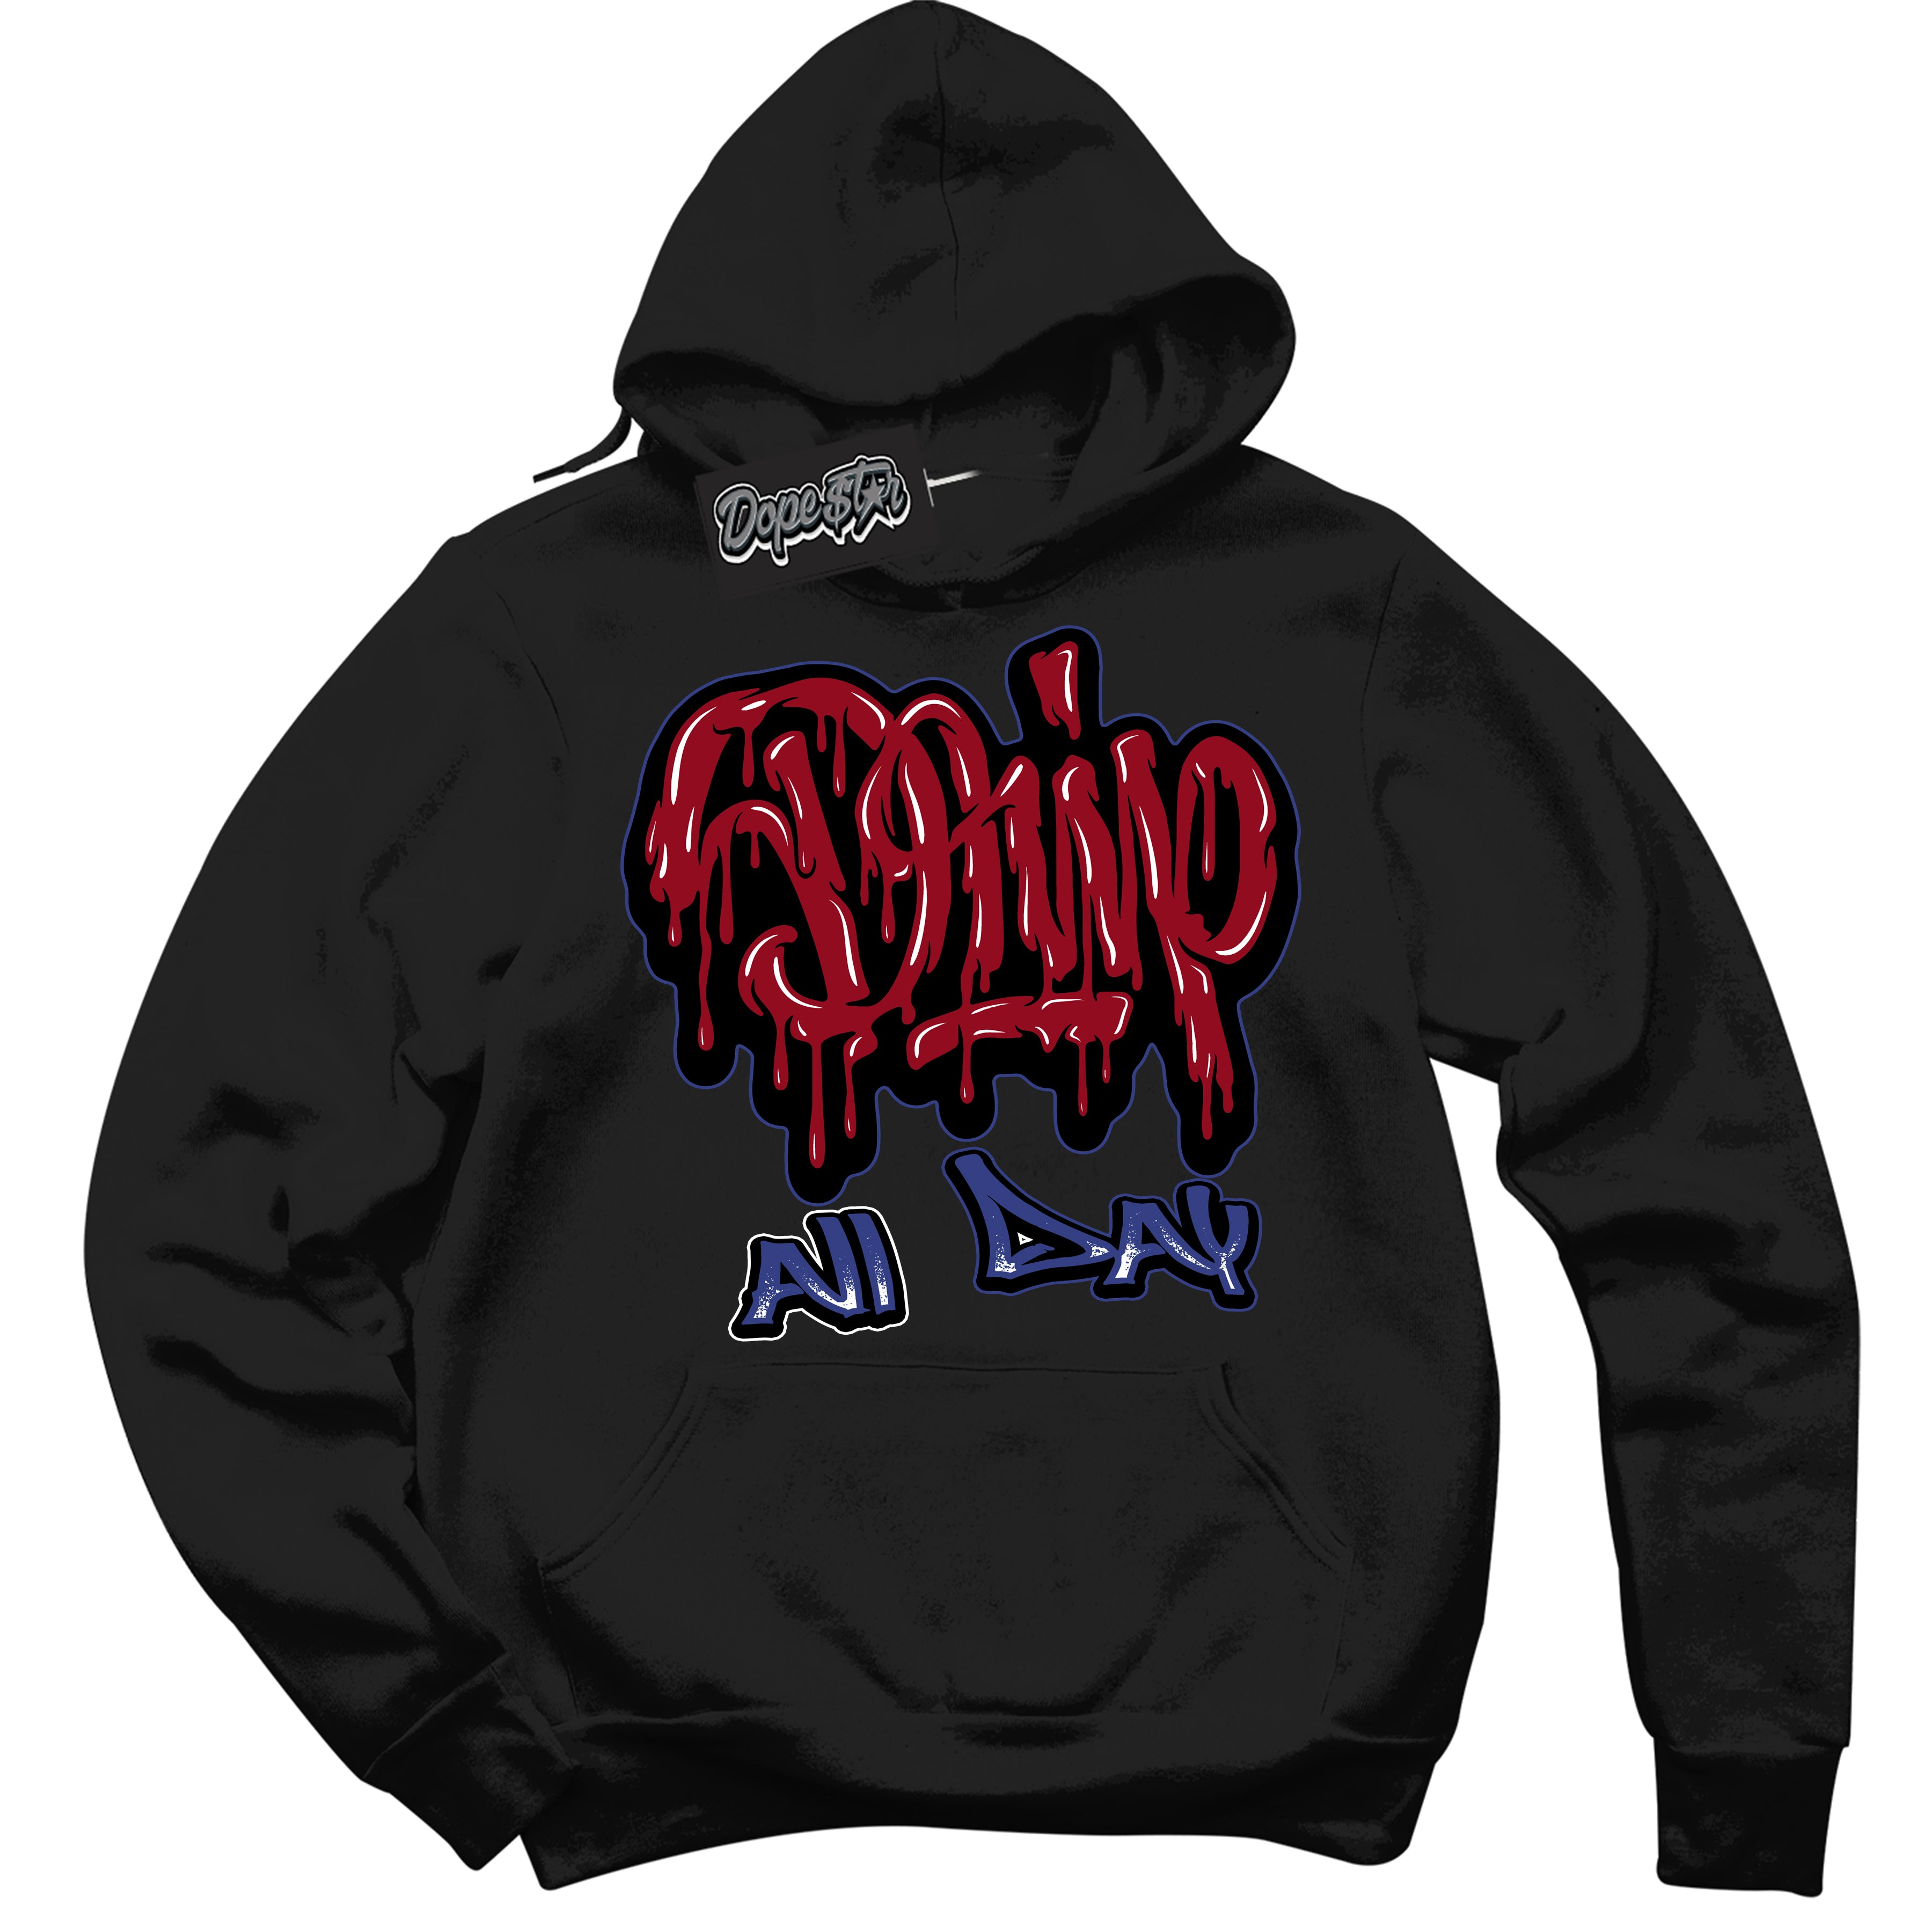 Cool Black Hoodie with “ Drip All Day ”  design that Perfectly Matches Playoffs 8s Sneakers.